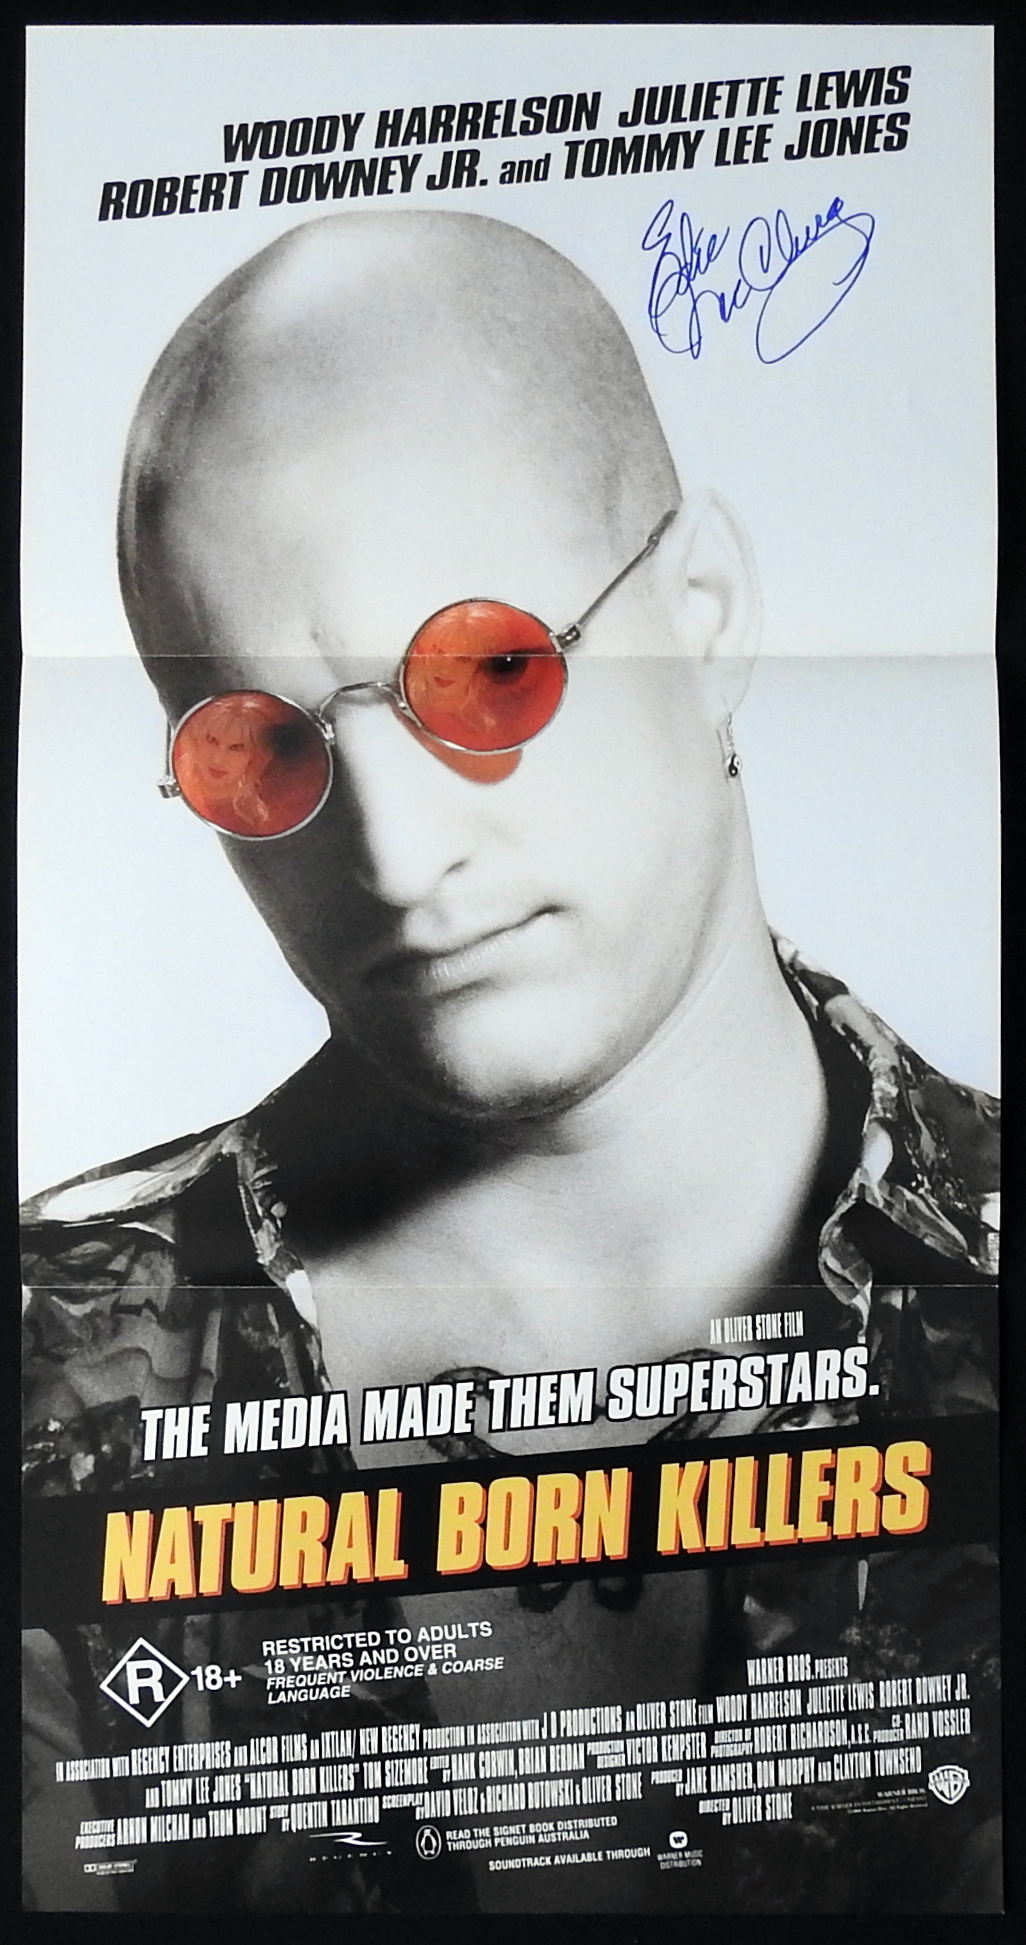 27x40" Theater Size NATURAL BORN KILLERS Movie Poster Licensed-NEW-USA 